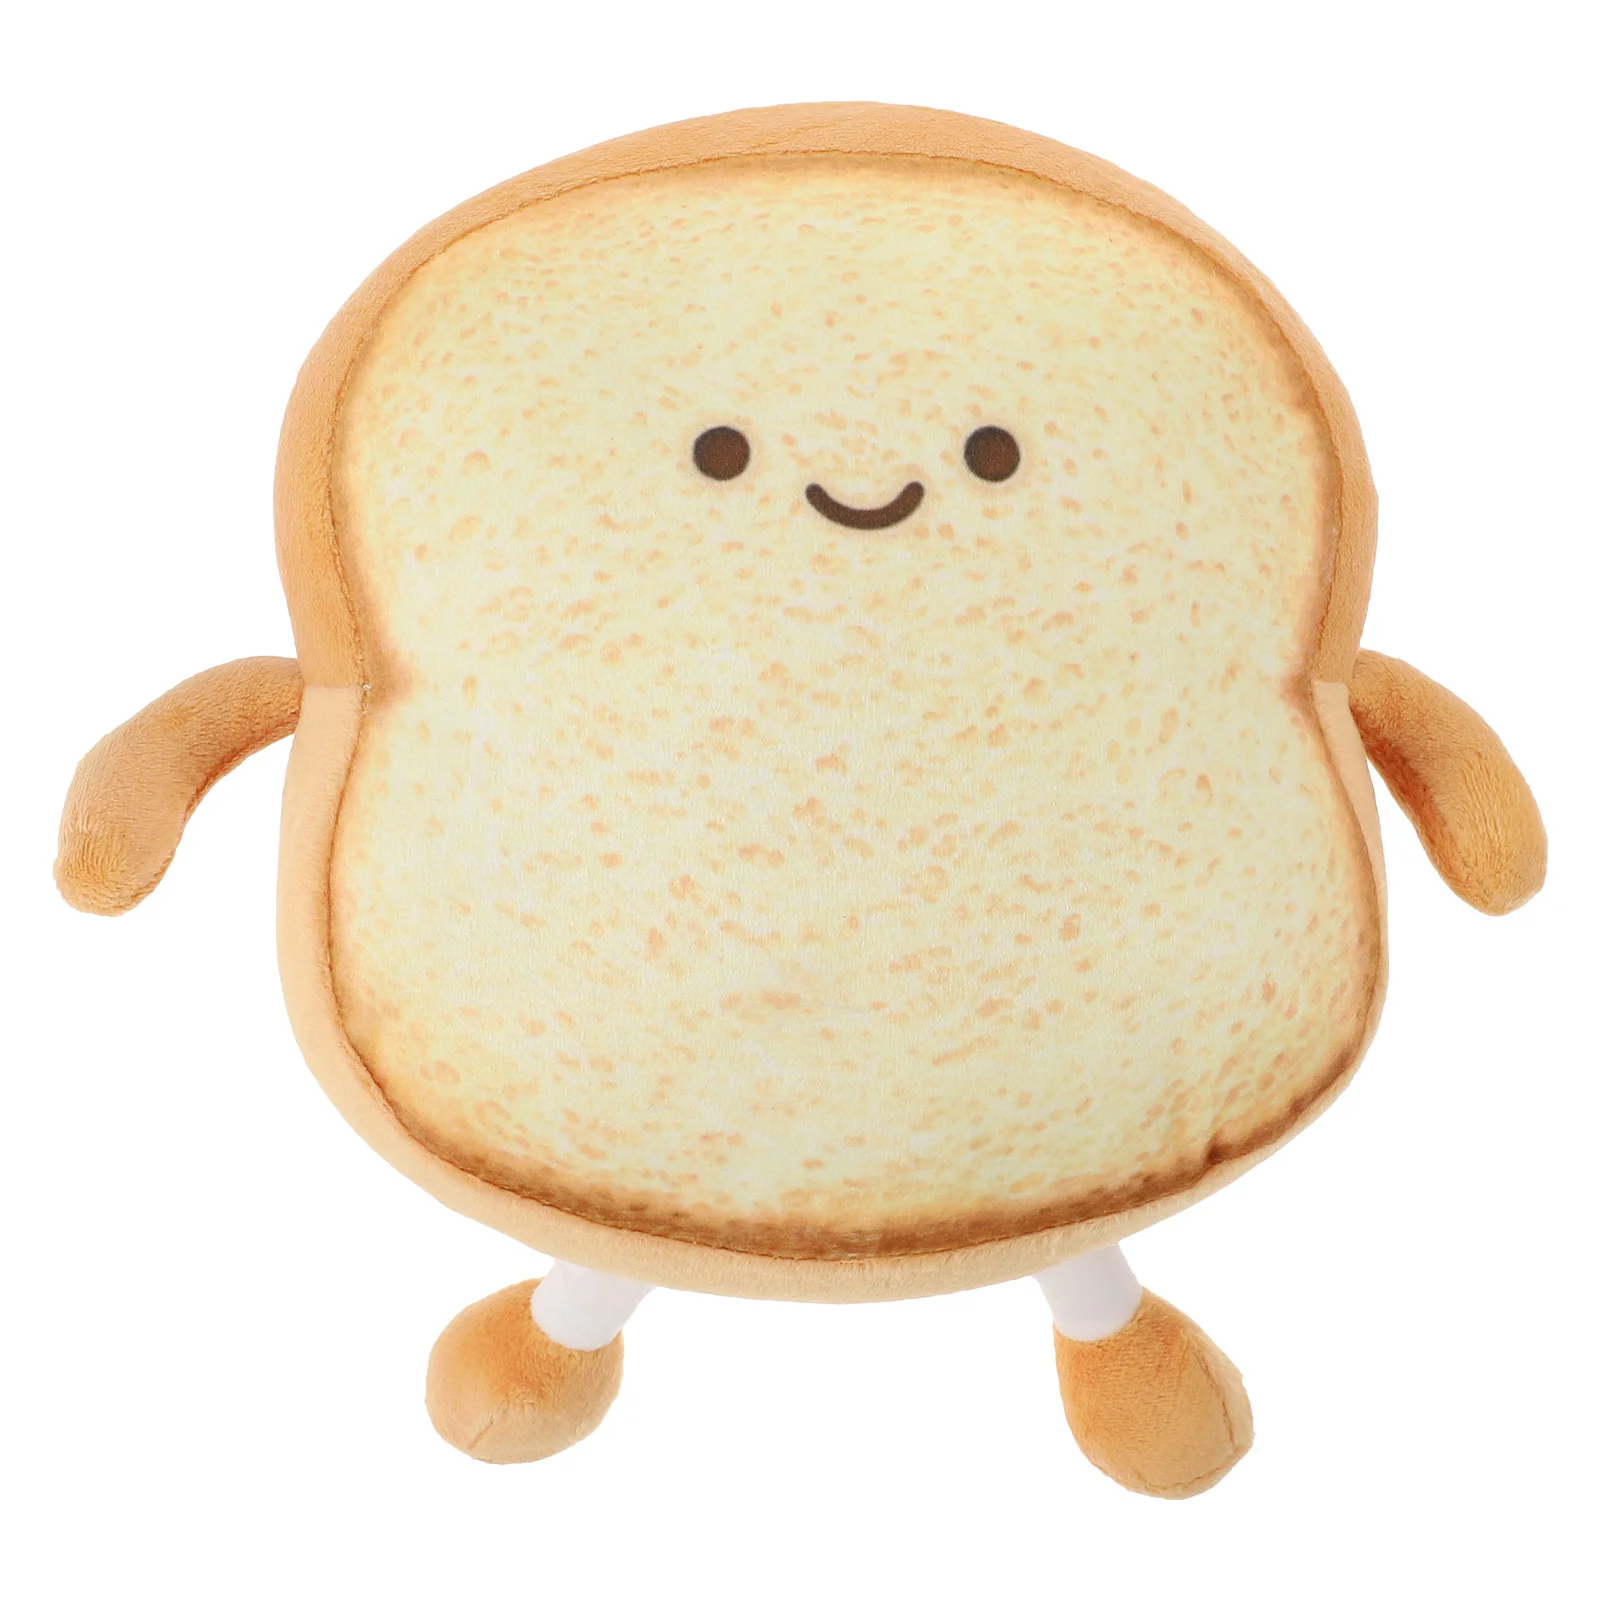 

Pillow Bread Plush Toast Pillows Shape Stuffed Throw Toy Birthday Toys Kids Present Loaf Shaped Adorable Funny Sliced Cushion